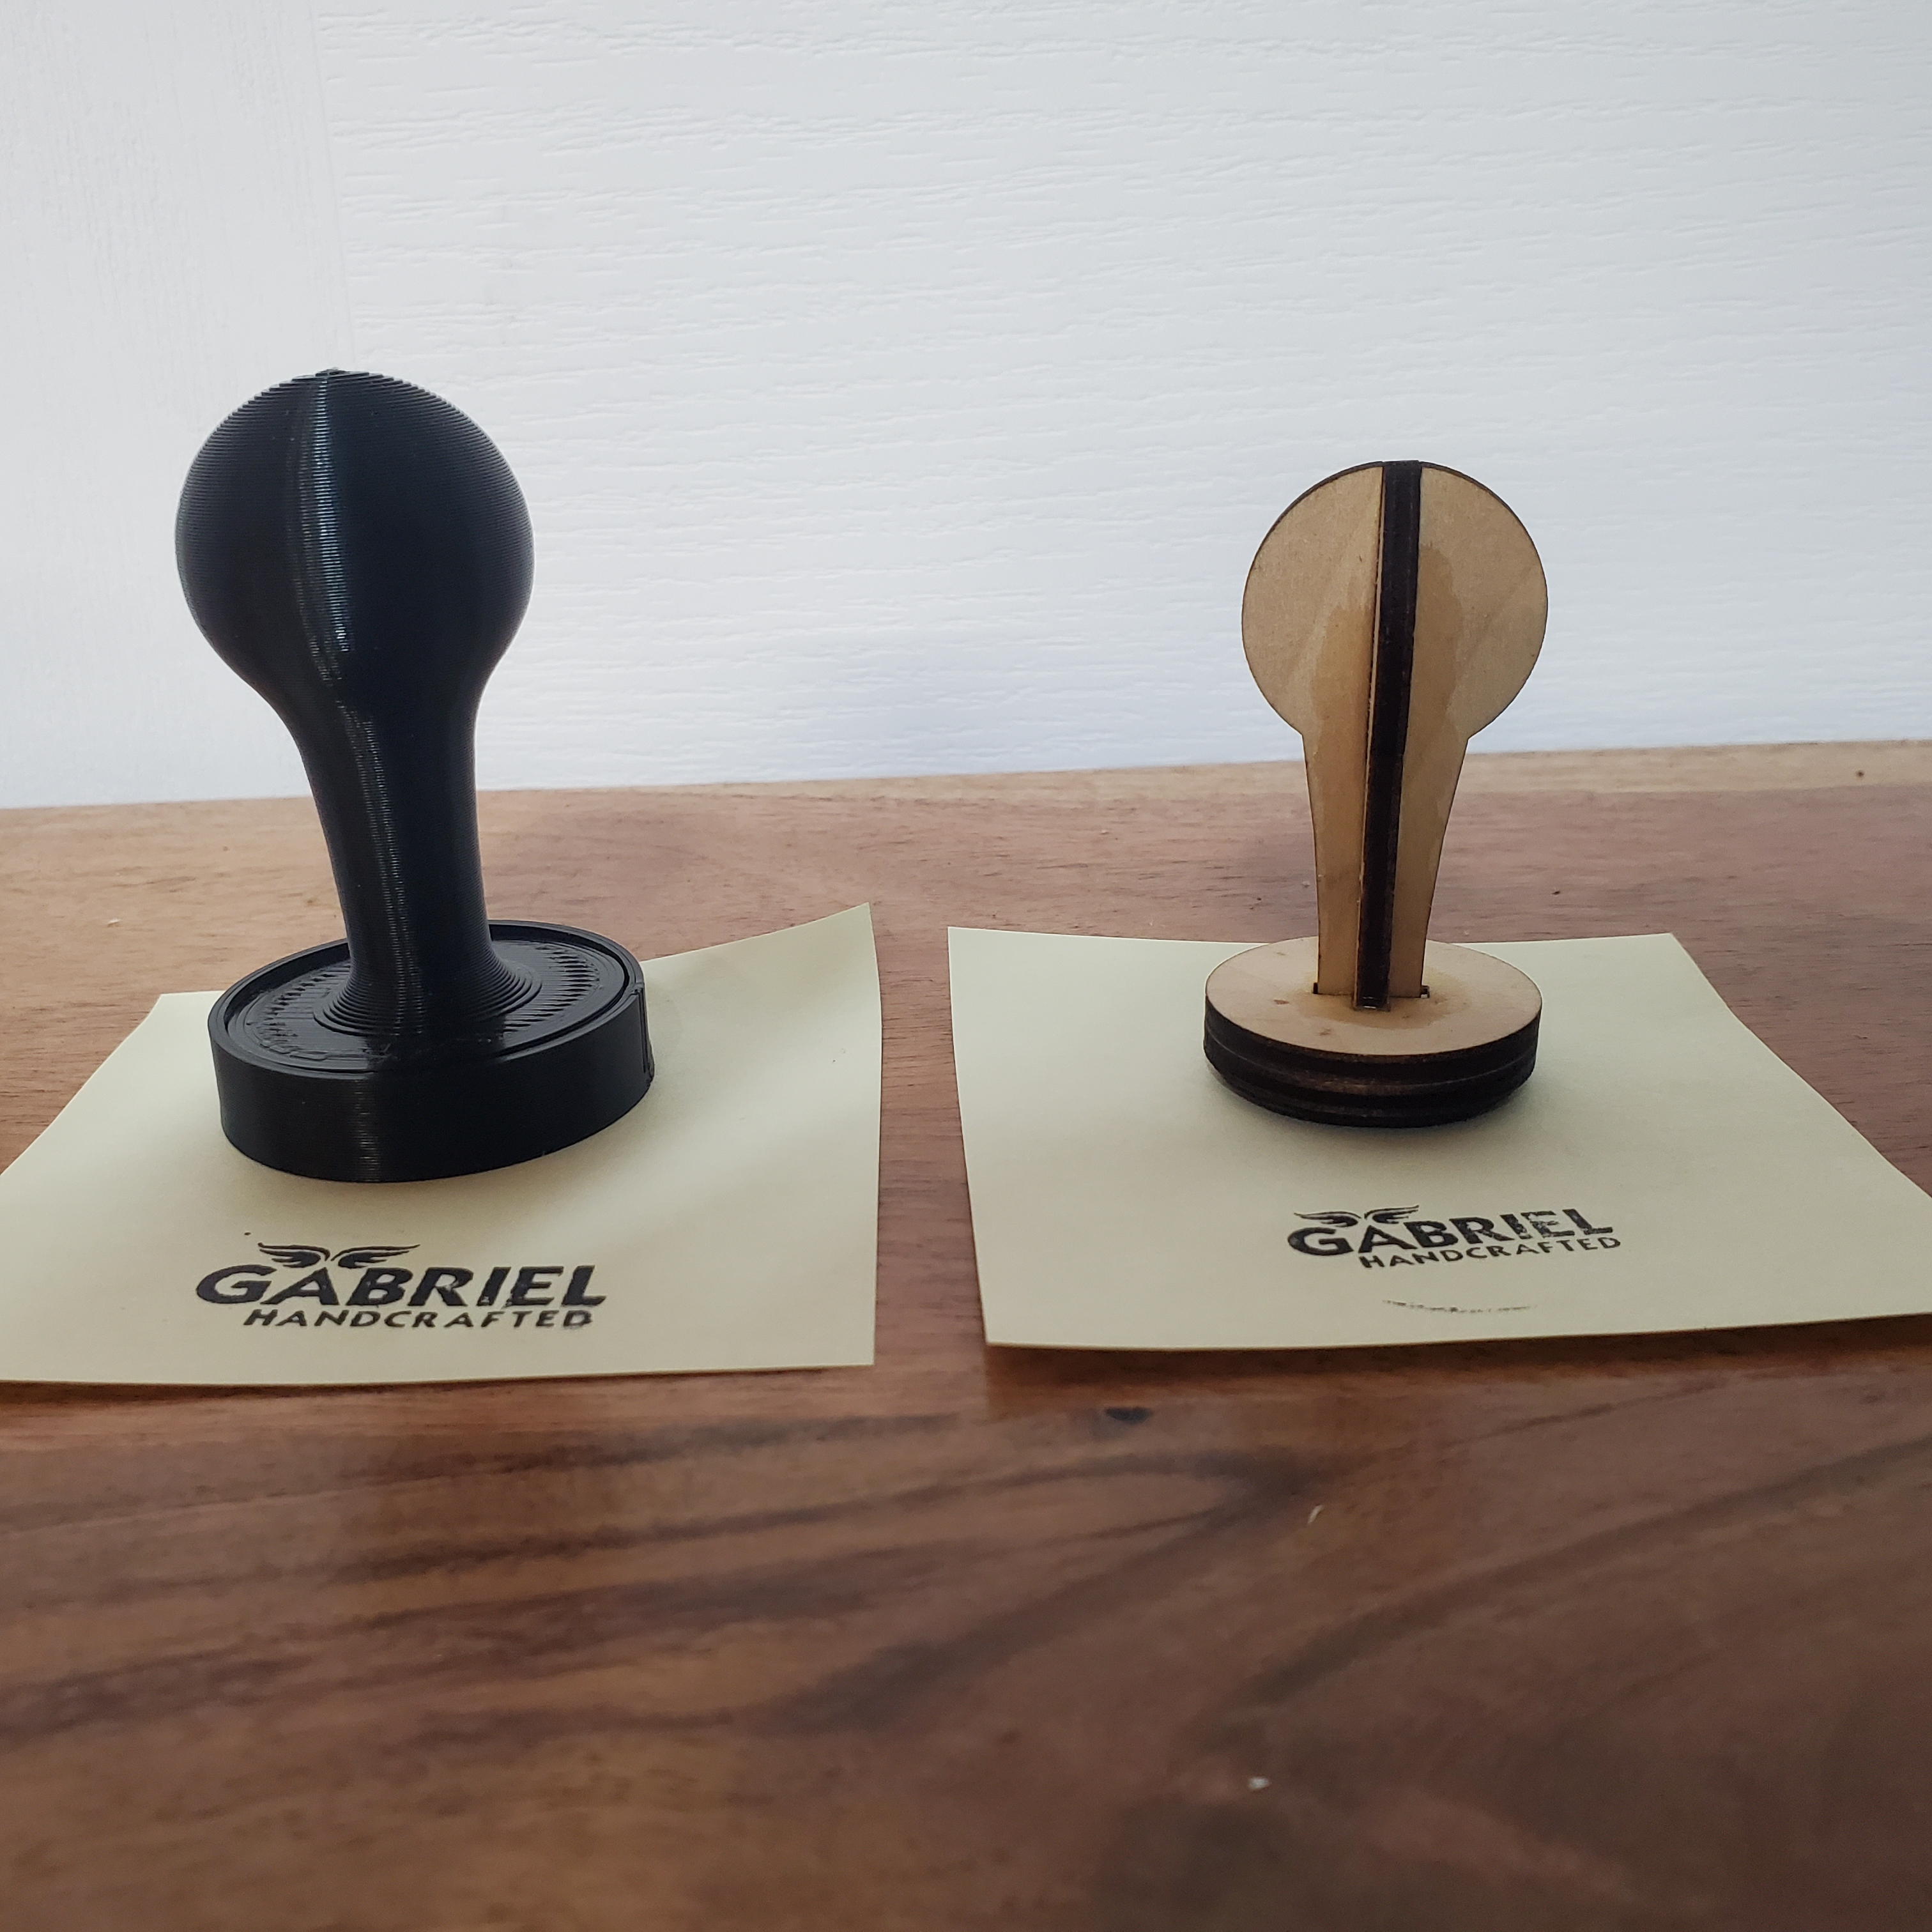 Rubber Stamp Handle (3D Printed or Laser Cut) Many Shapes/Sizes by